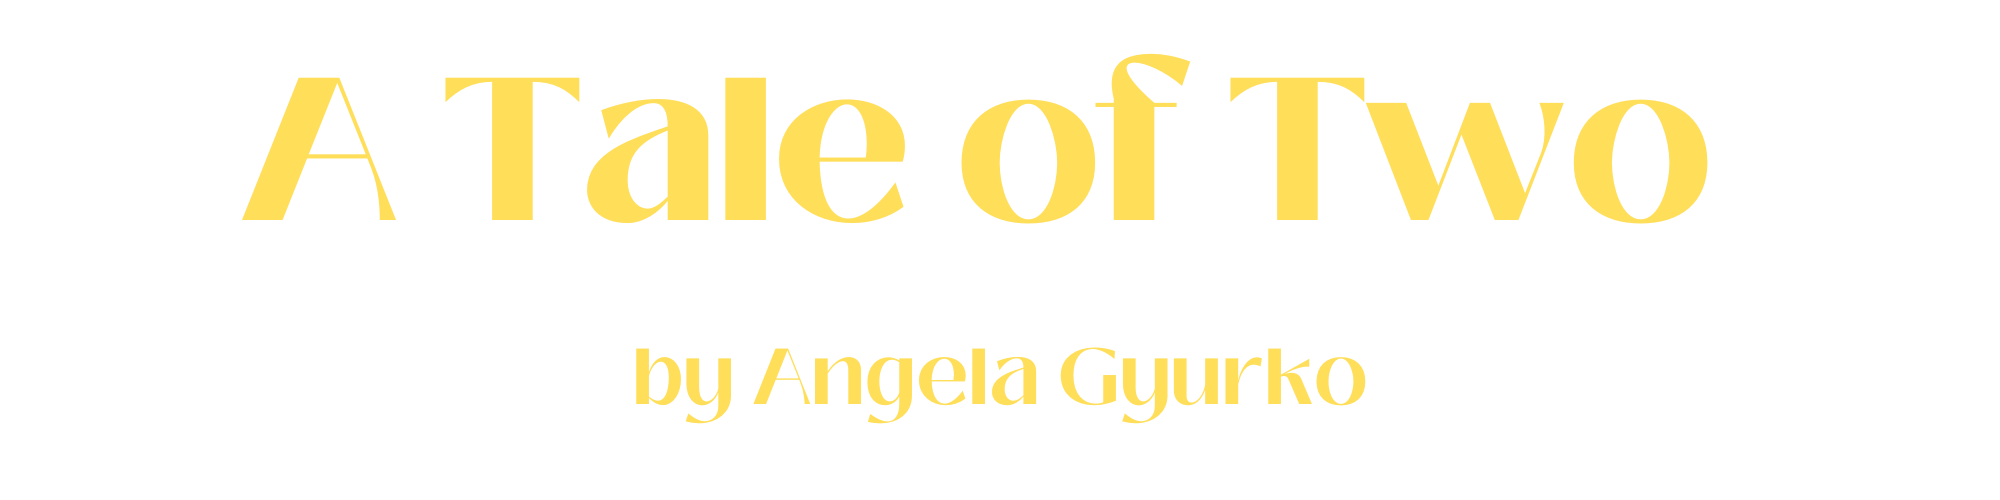 typography of the title "A Tale of Two"